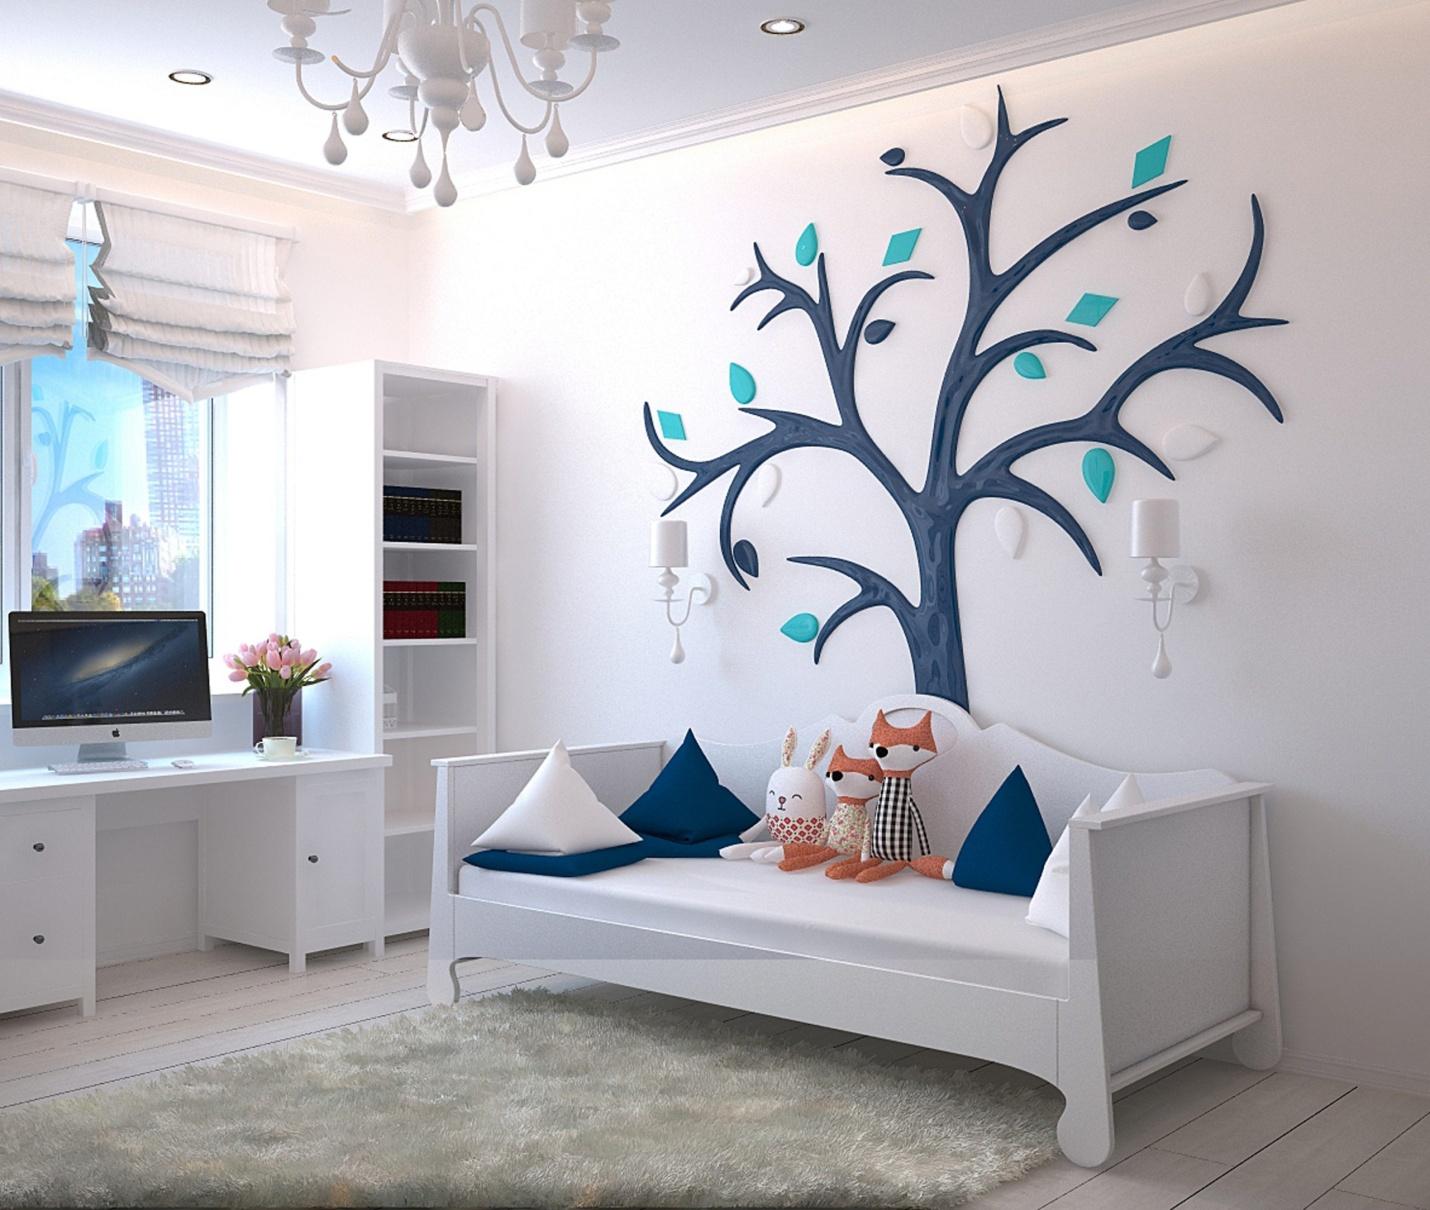 Decorating Your Child's Room on a Budget – 4 Tips For a Room They'l Love -  Real Mum Reviews